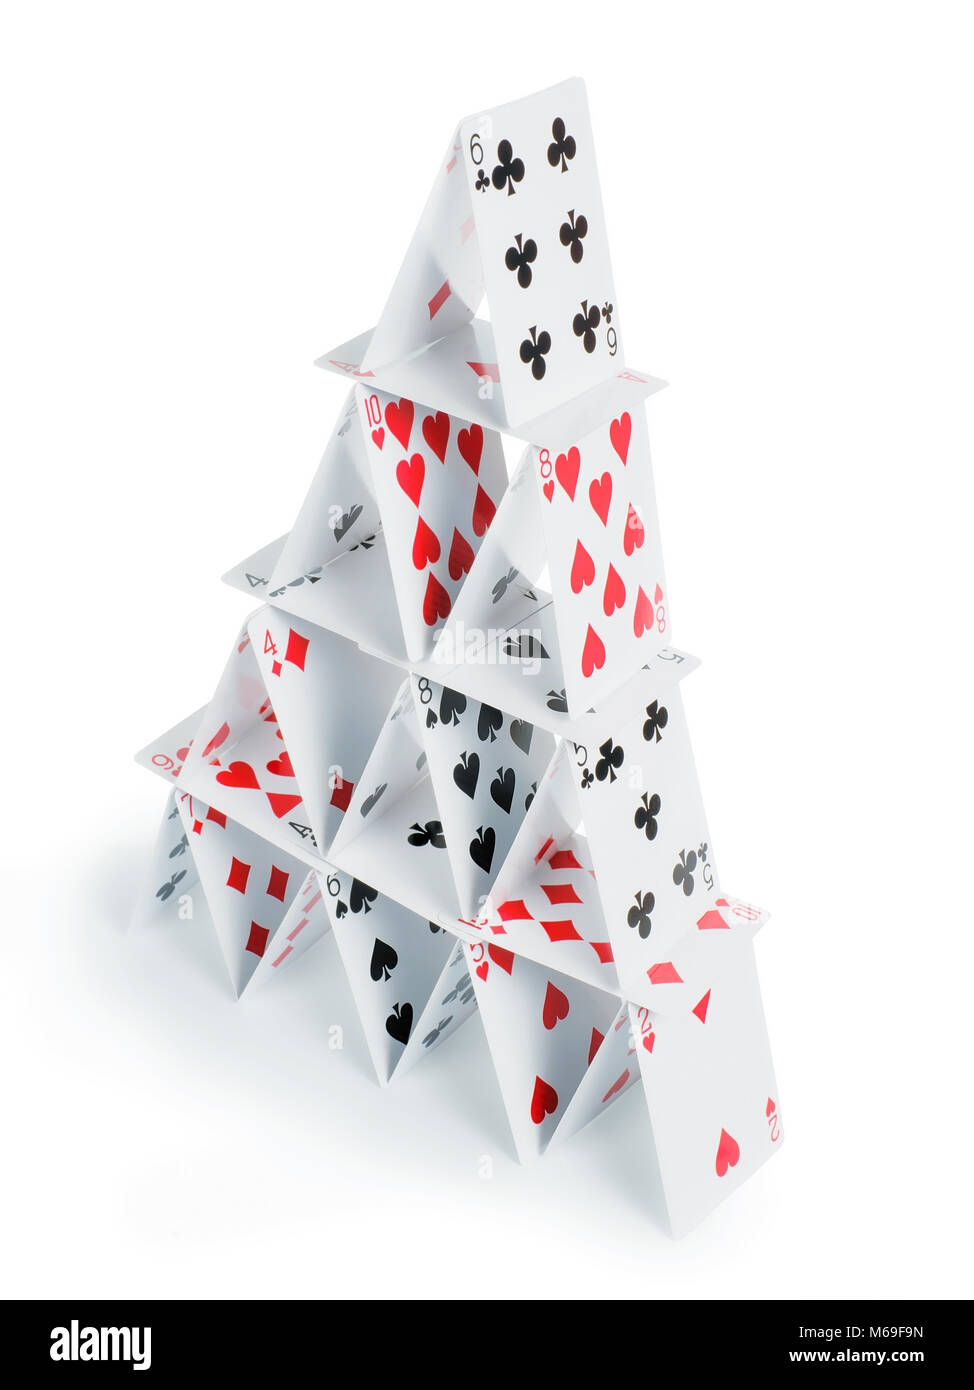 House of cards. Isolated on white, high angle view, clipping path included Stock Photo